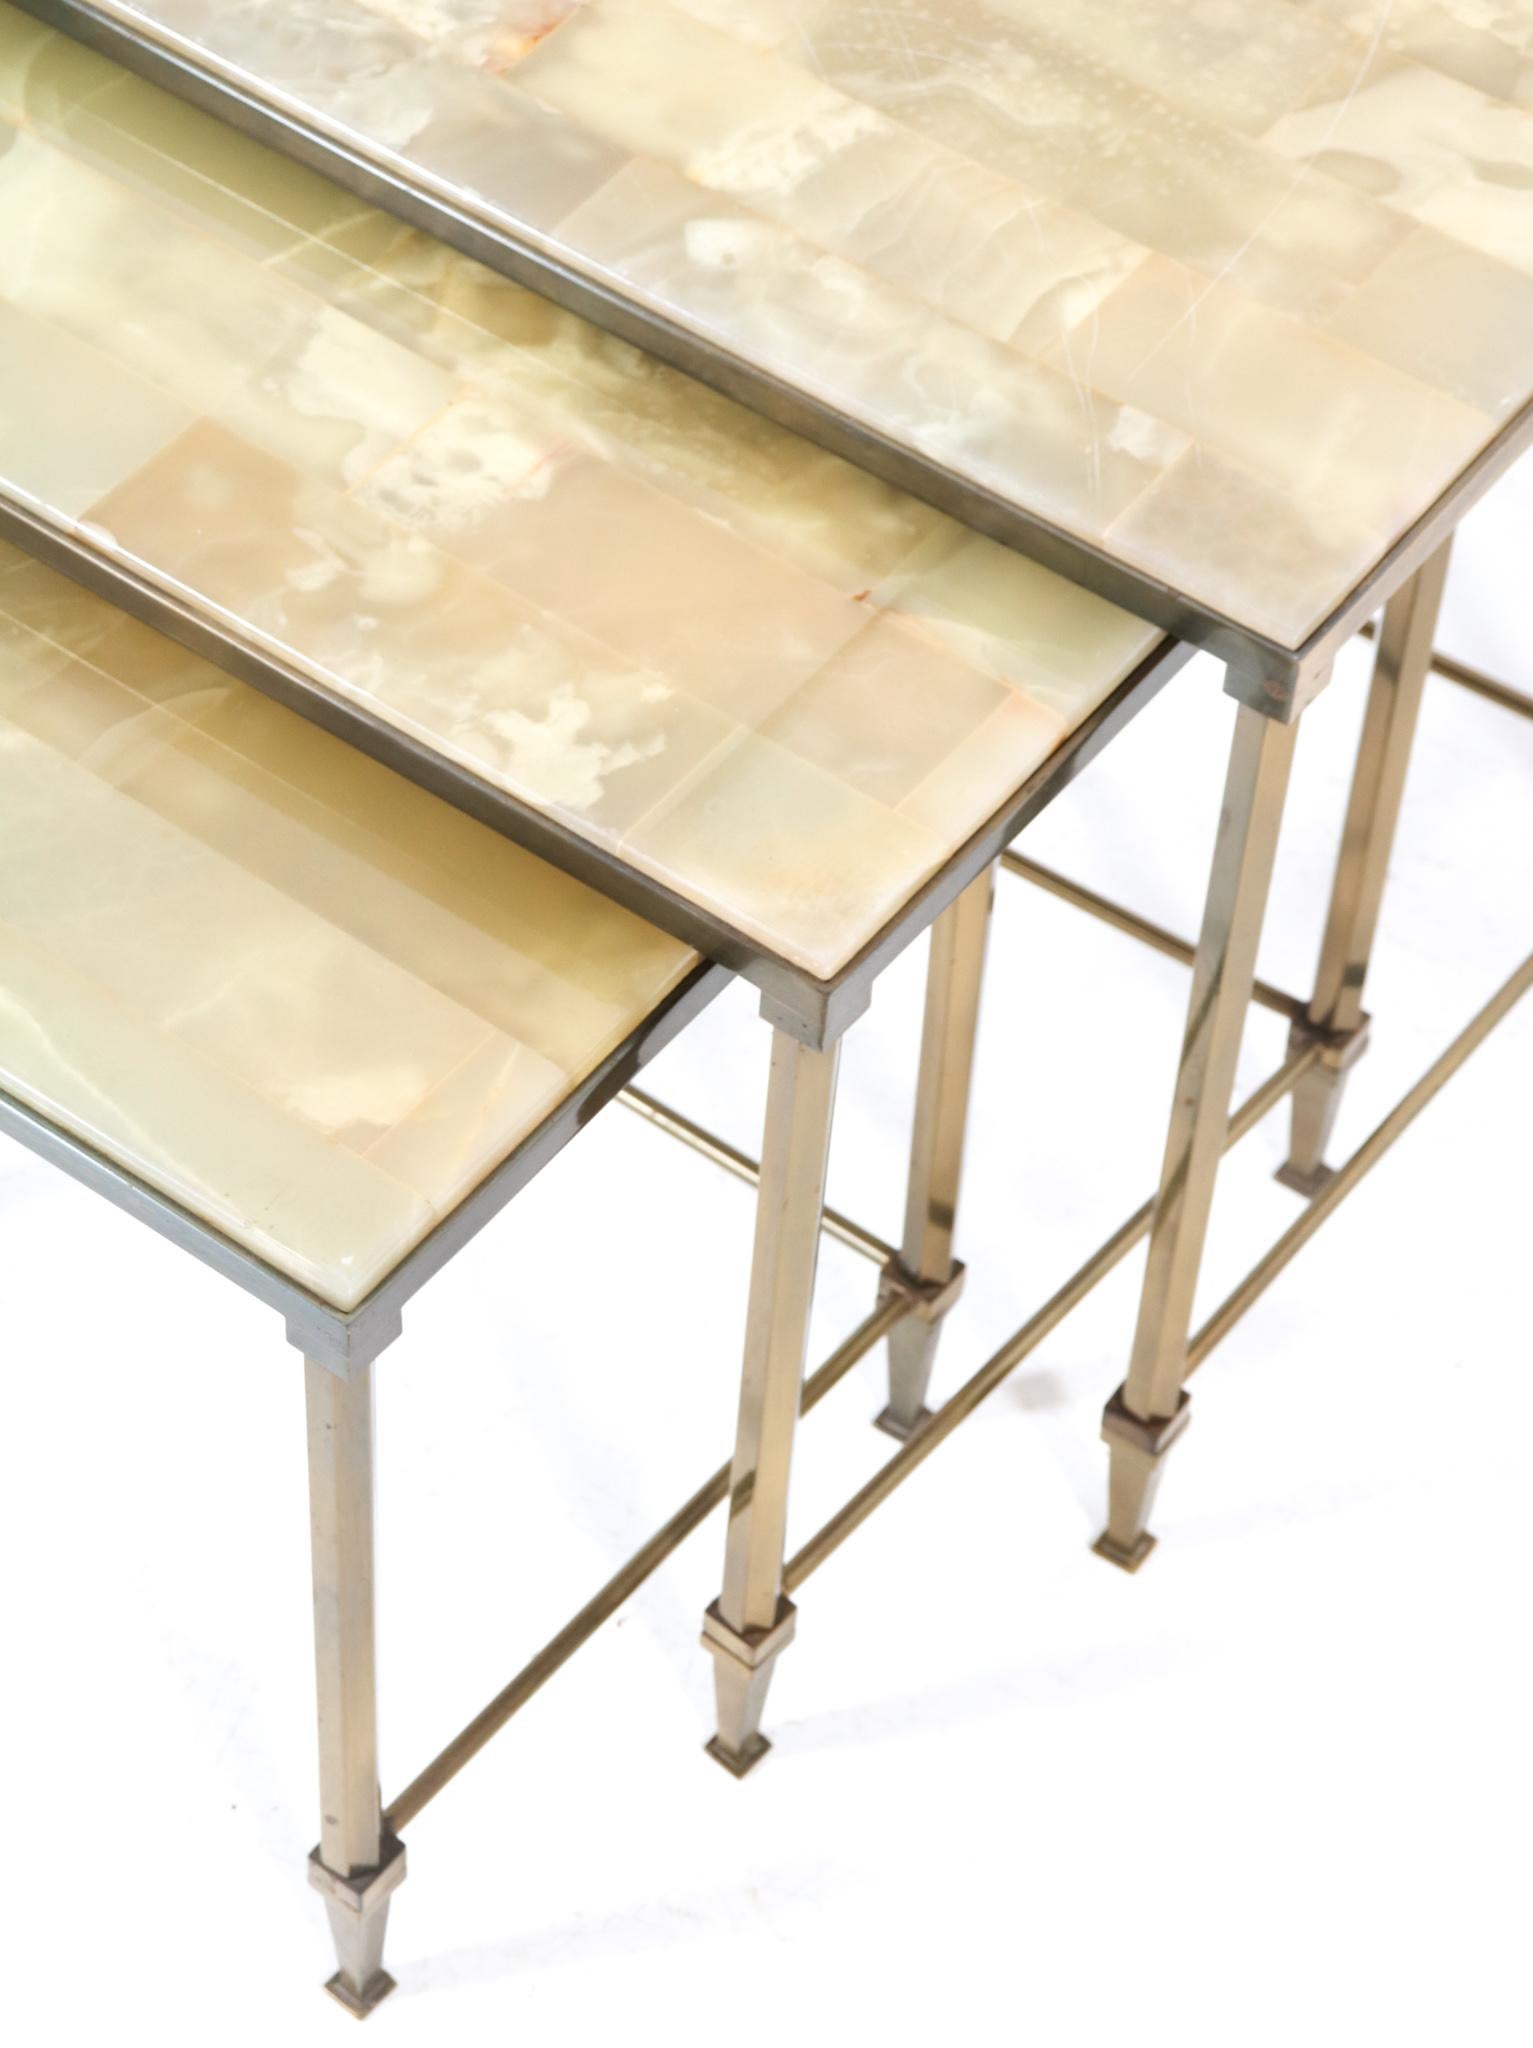 Gilt Brass Hollywood Regency Nesting Tables with Alabaster Tops, 1970s For Sale 5